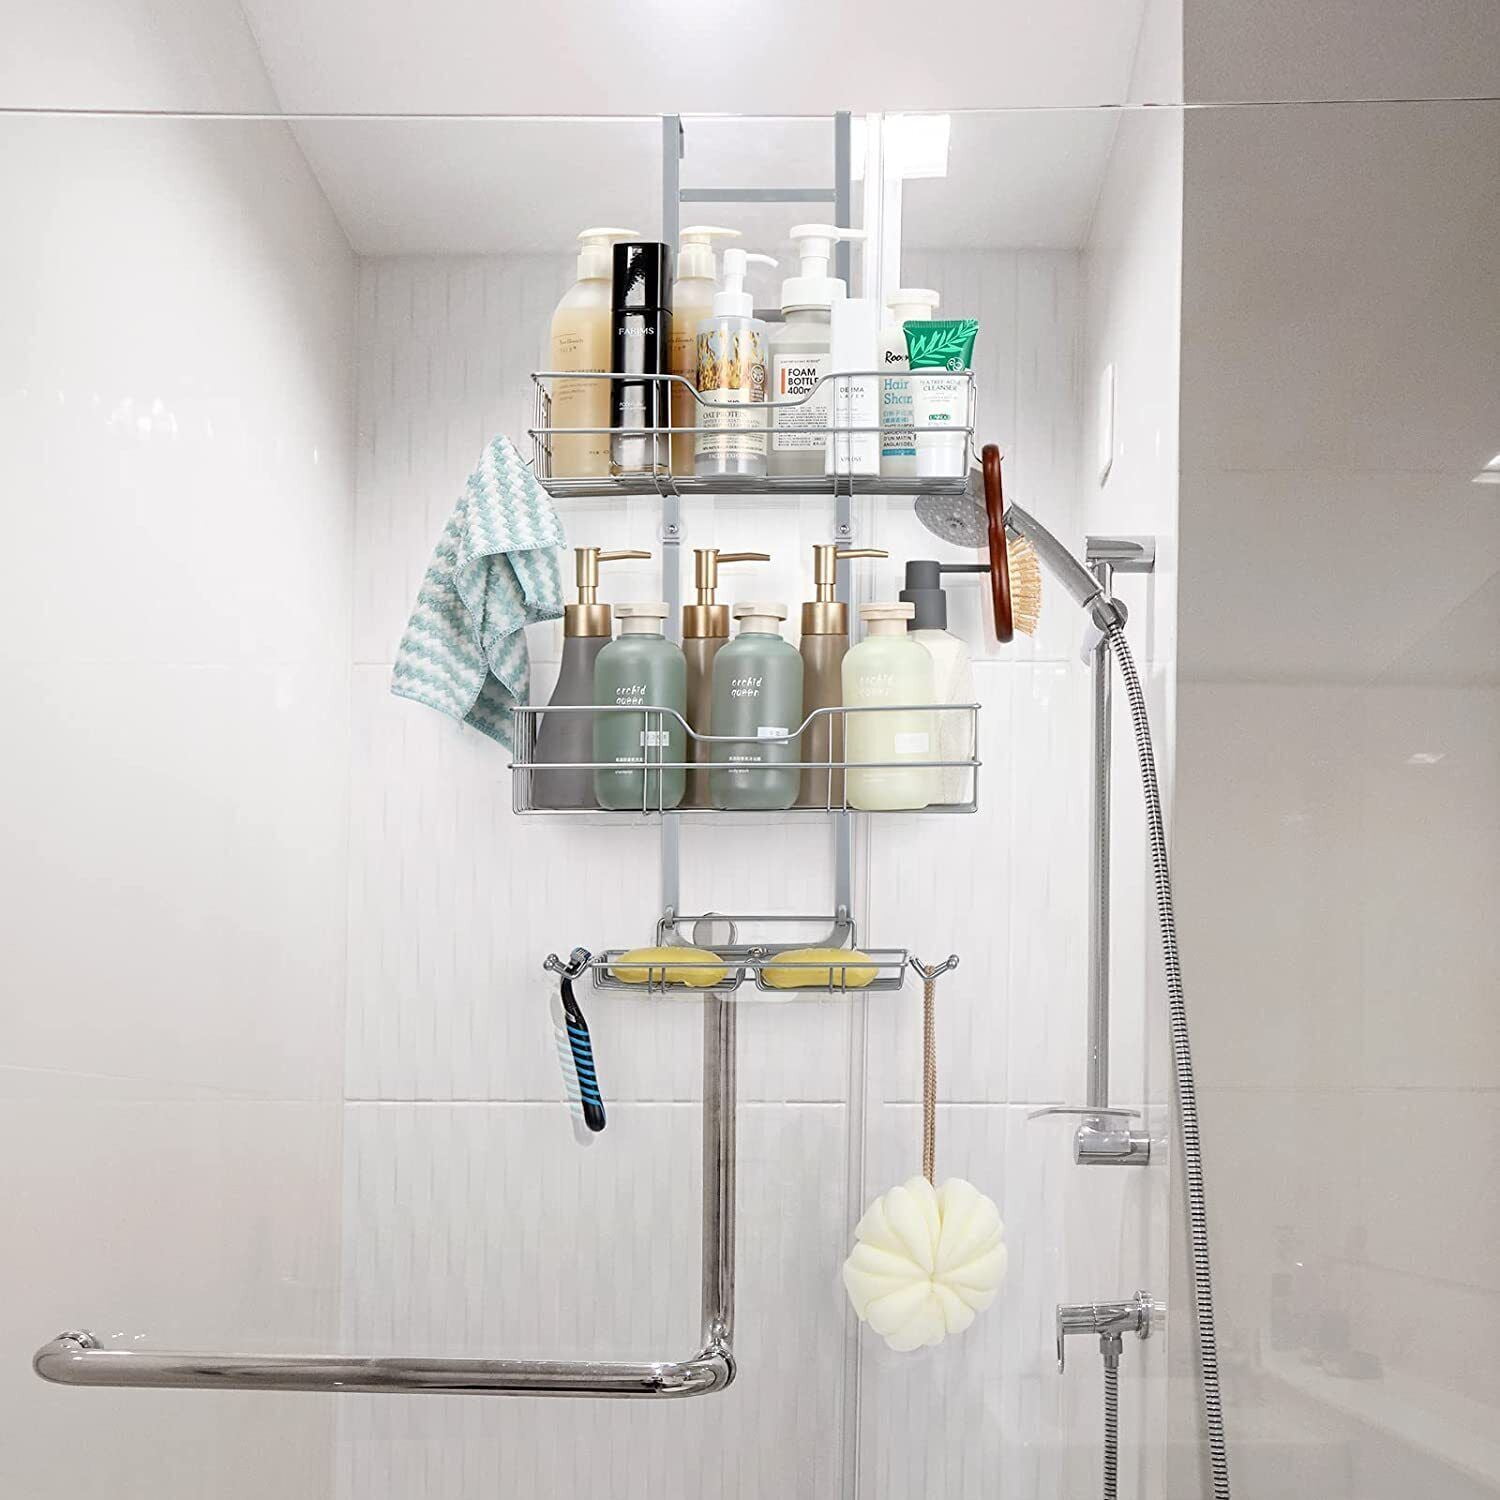  dabria Shower Caddy Hanging, Stable Shower Caddy Over Shower  Head with Adjustable Height, 3 in 1 Rust Proof Shower Organizer Shelf, No  Drilling, 4 Powerful Suction Cups, Non-Slip Hanging Shower Caddy 